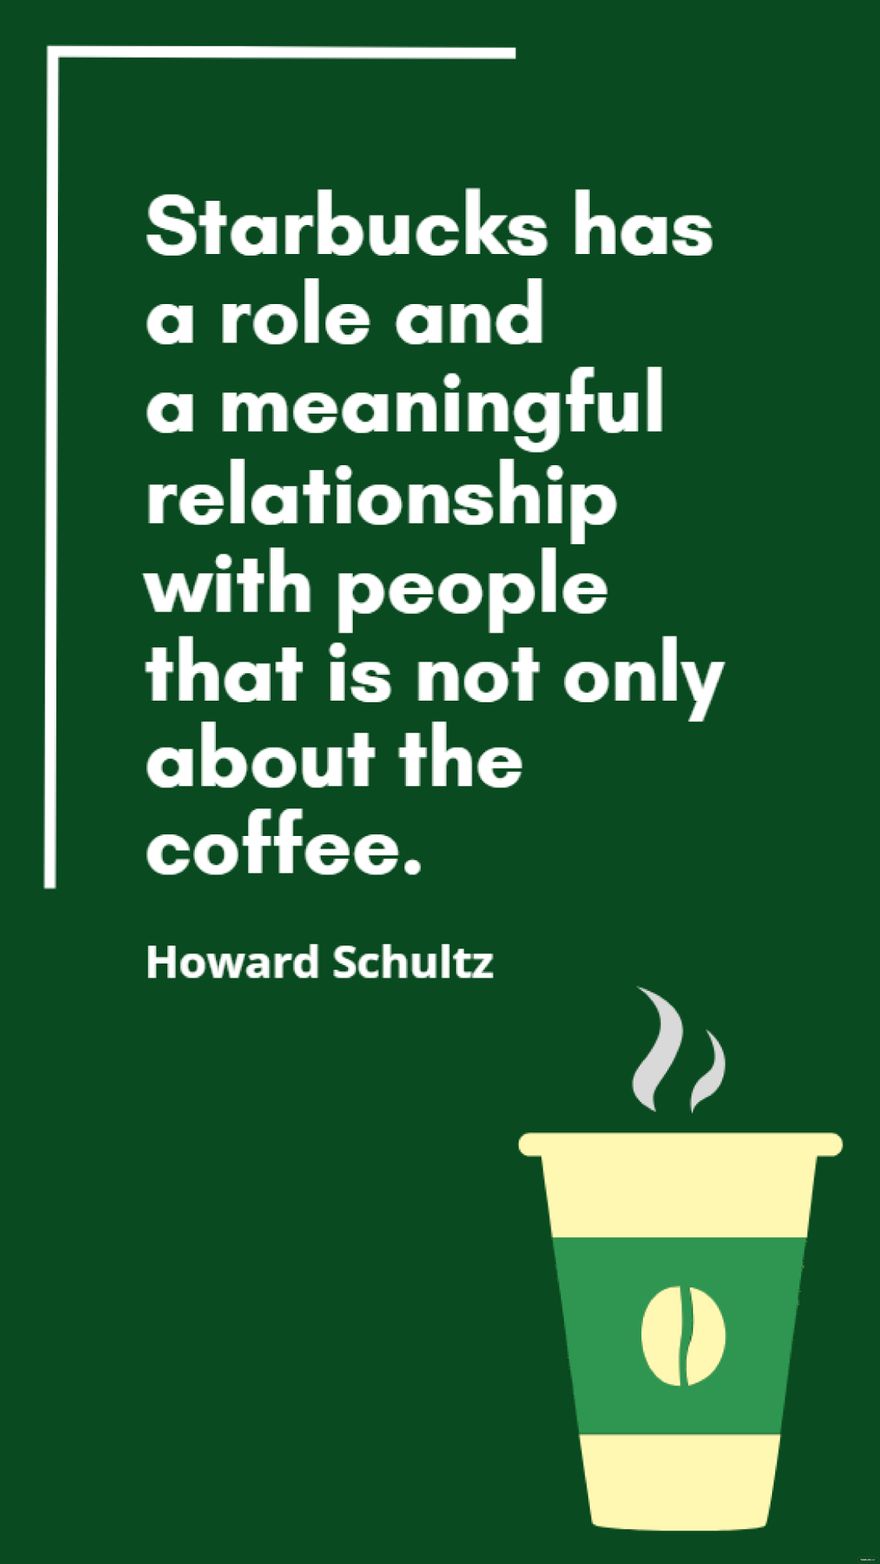 Howard Schultz - Starbucks has a role and a meaningful relationship with people that is not only about the coffee.